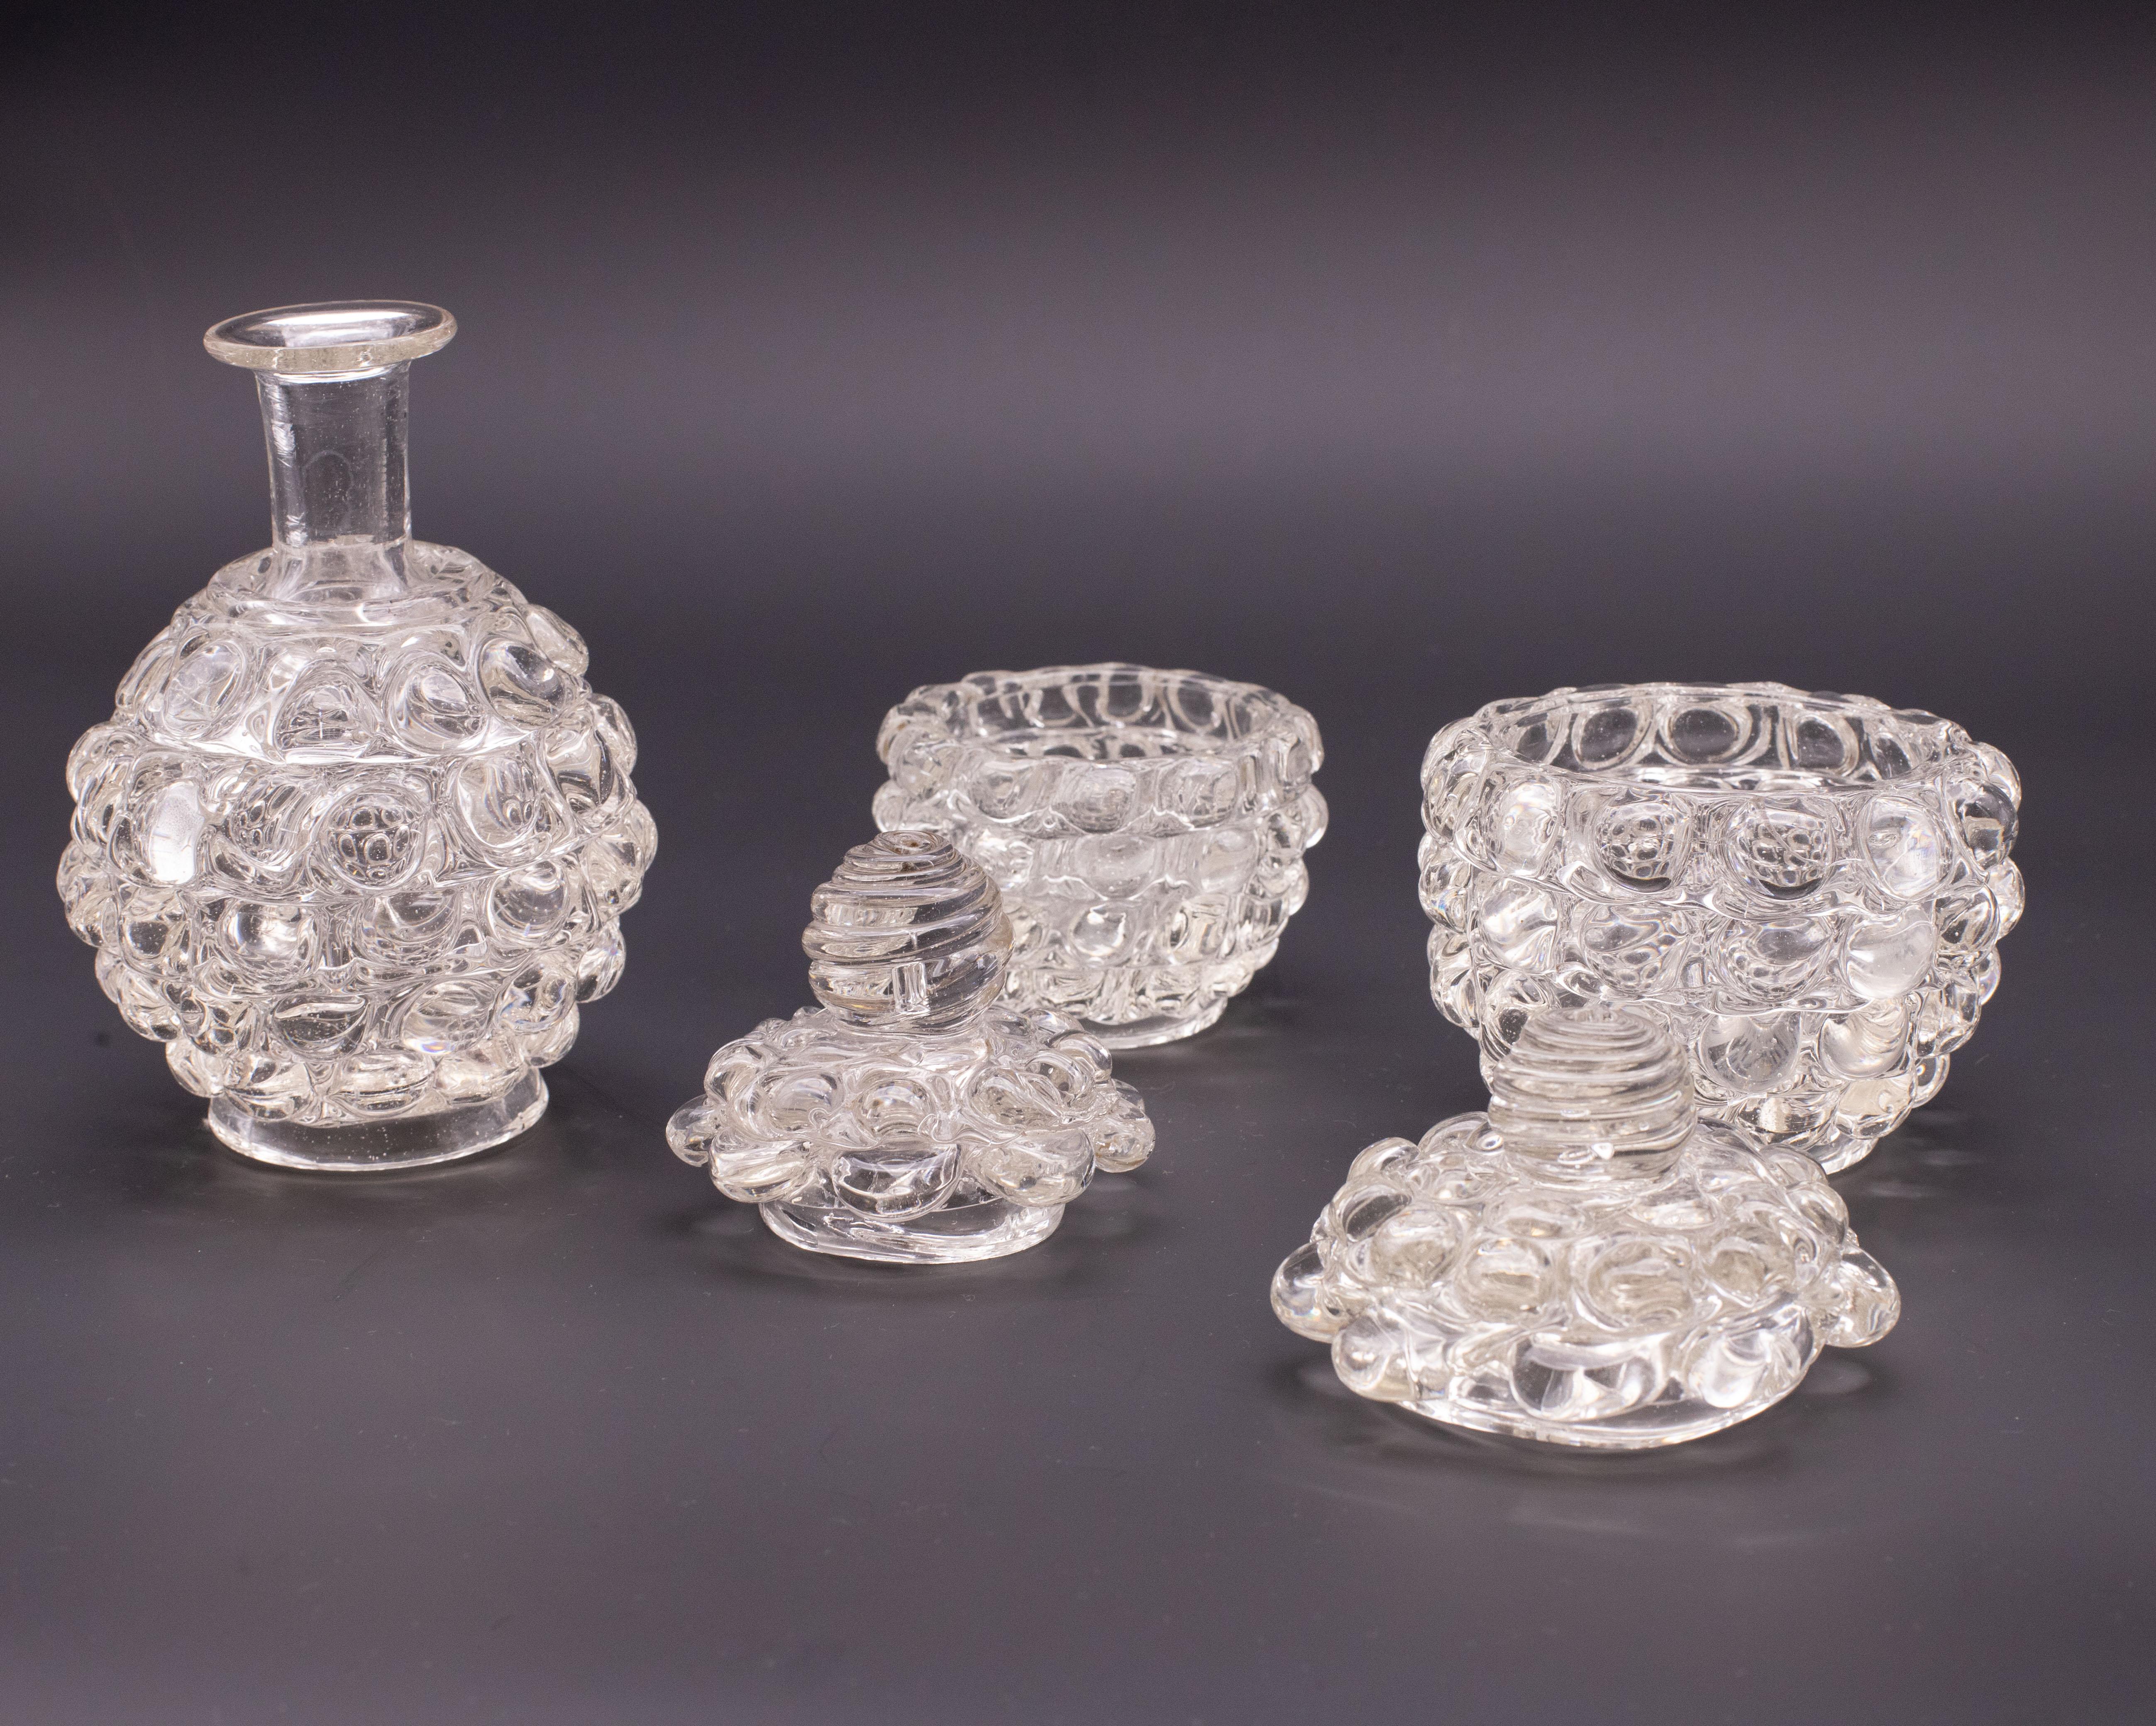 Extraordinary and unique rare set of 3 lens series vase by Barovier and Toso glassworks, period 1940.

Small pitcher
h 12 centimeters
D 8 centimeters
Pitcher large
h 13
D 10
Vase 
h 15
D 14

Excellent vintage condition.
